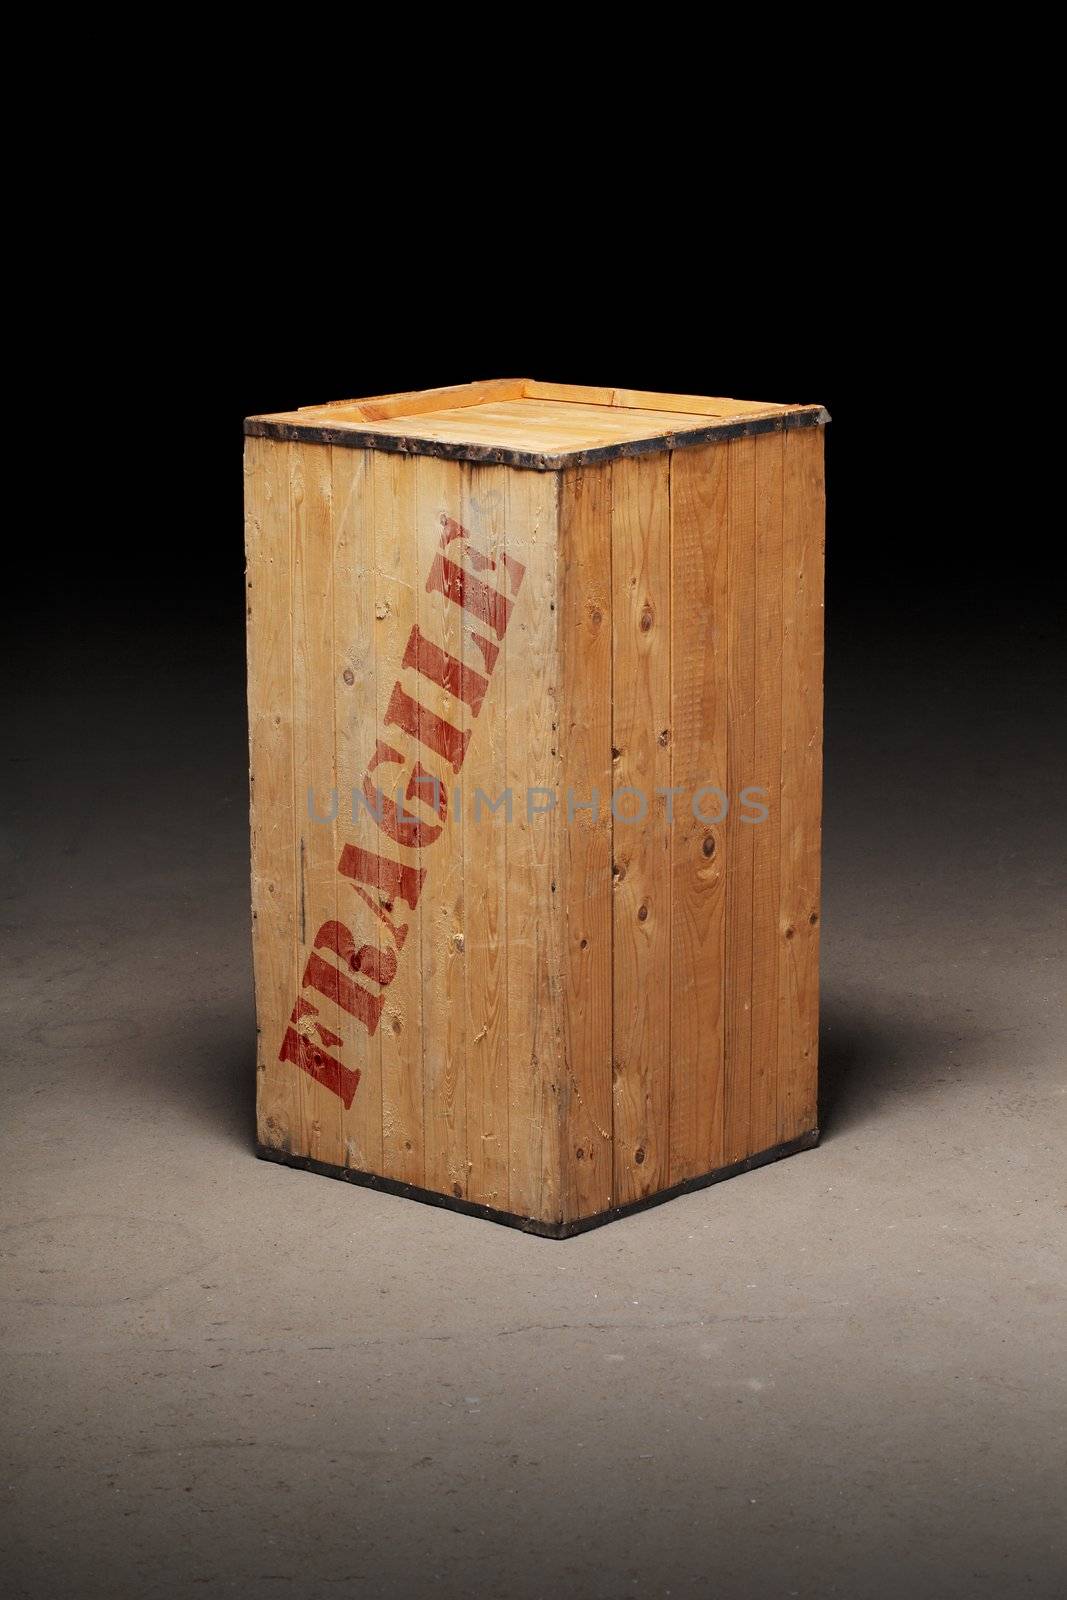 Mysterious old wooden crate with word "Fragile".